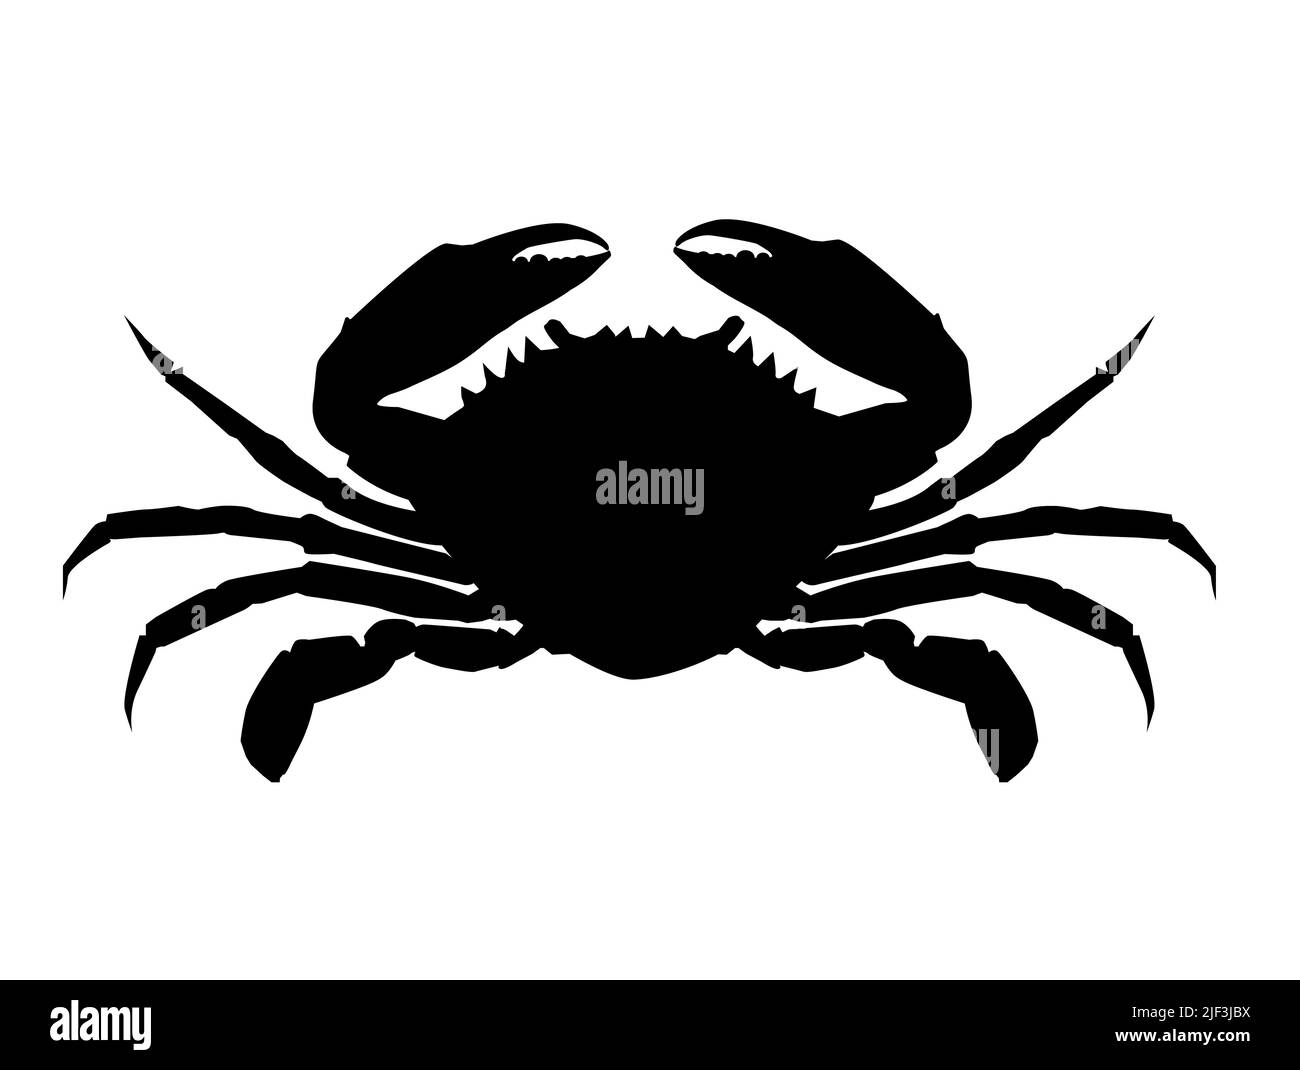 realistic crab on white background. silhouette of brown crab. crab sign. flat style. Stock Photo